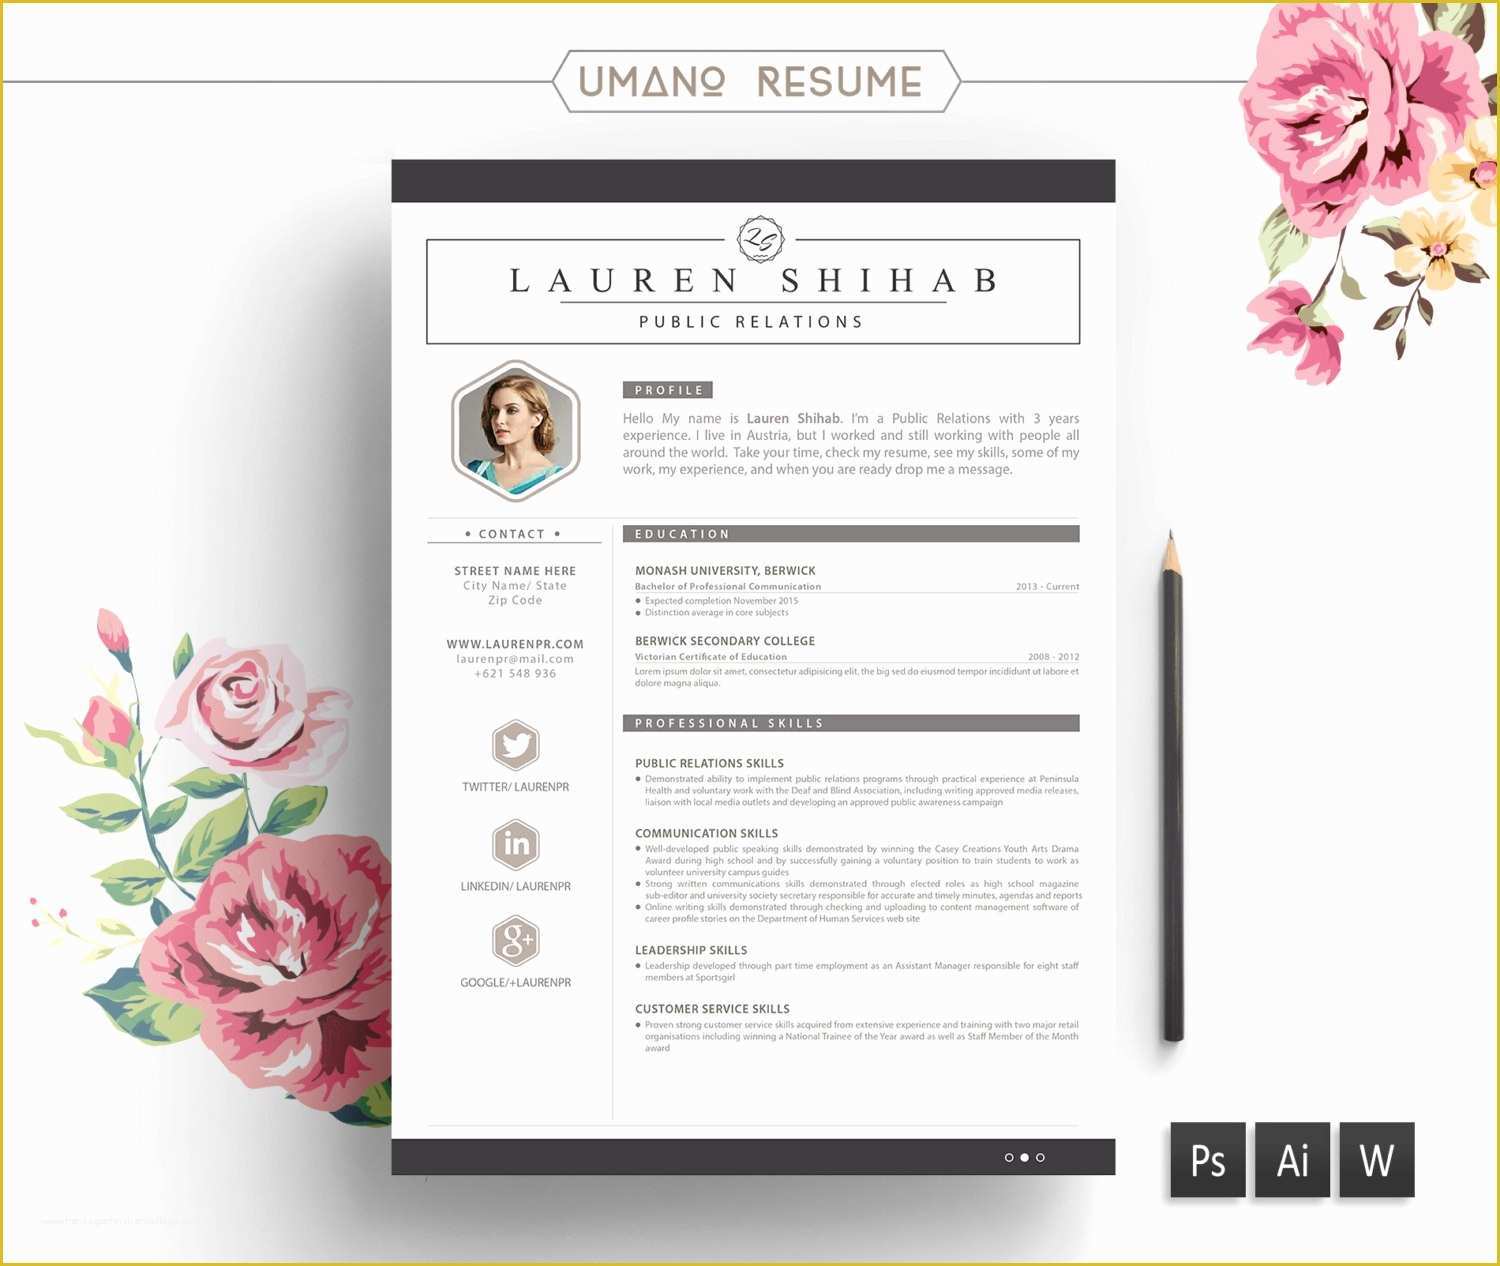 Free Windows Resume Templates Of Free Resume Word Templates Downloads for Windows 10 Tag